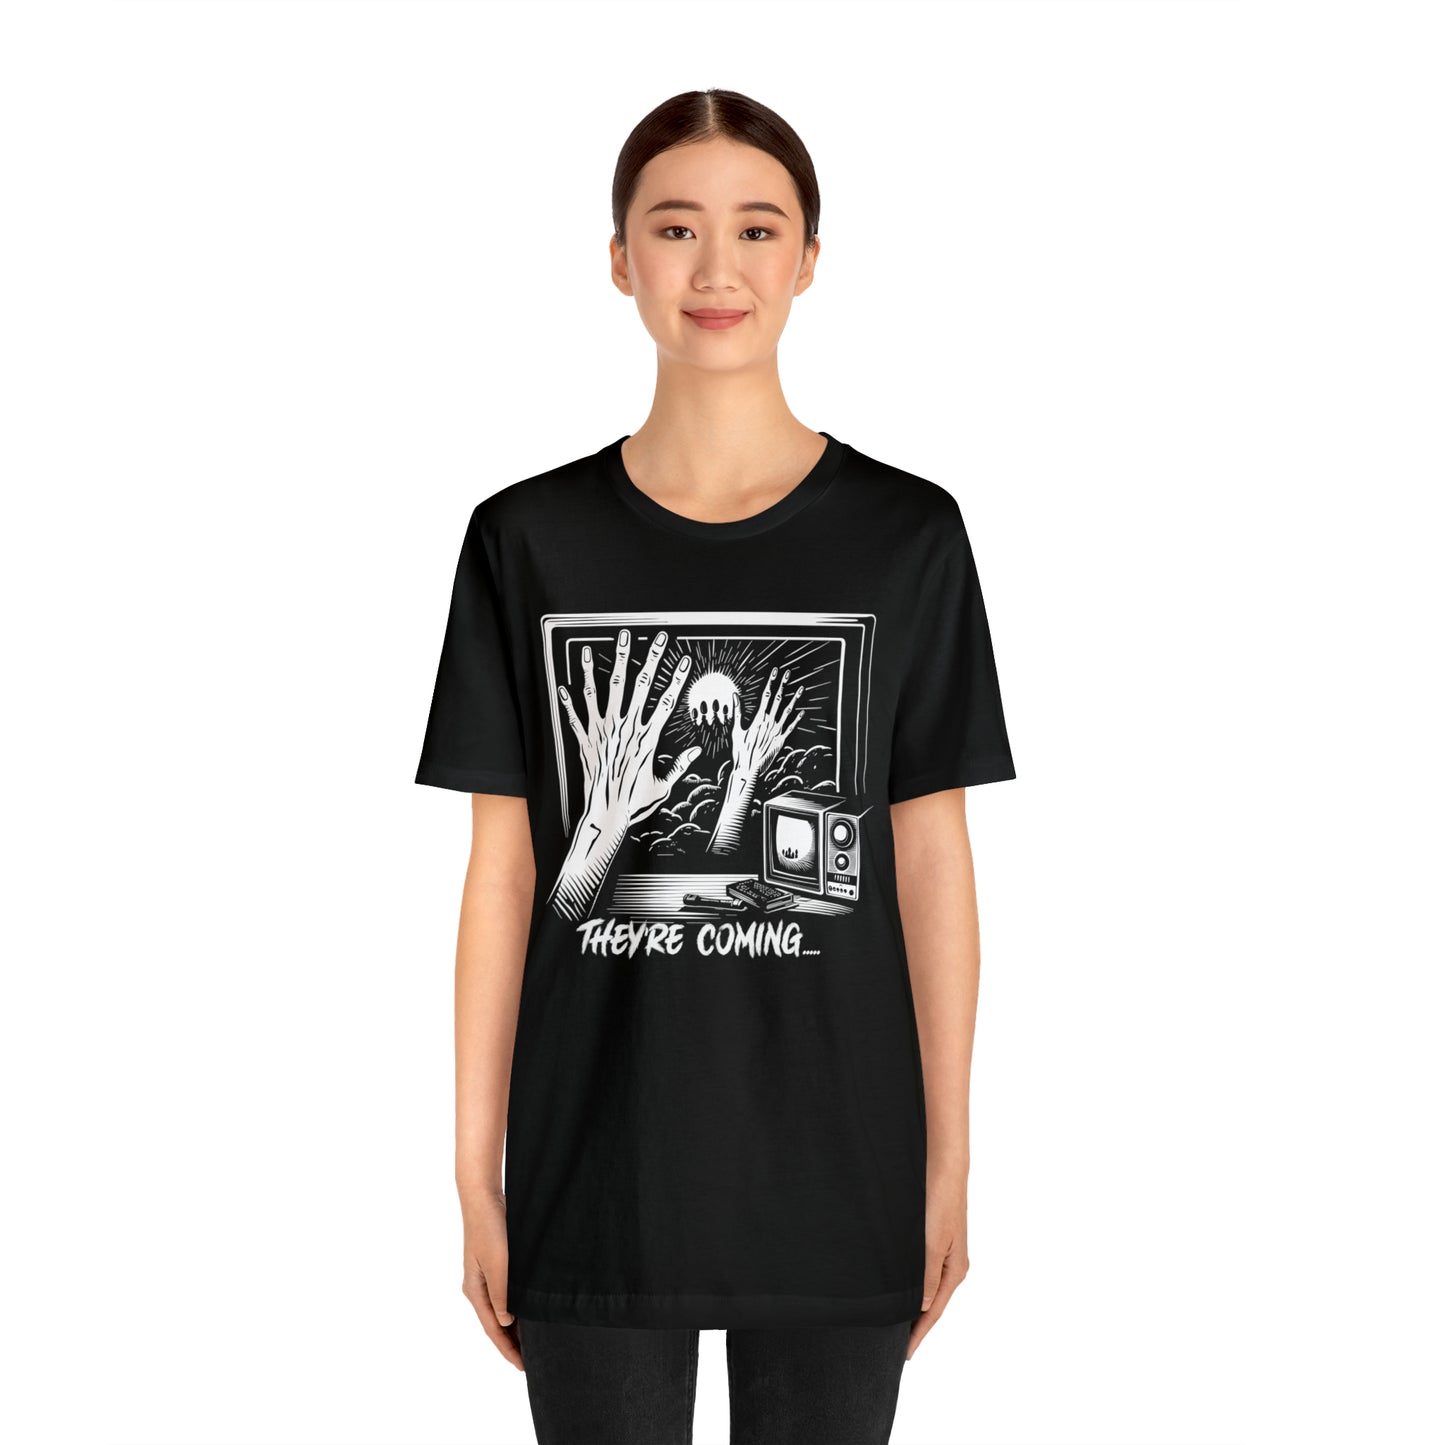 They're Coming Haunted Halloween Retro Eerie Anticipation T-Shirt